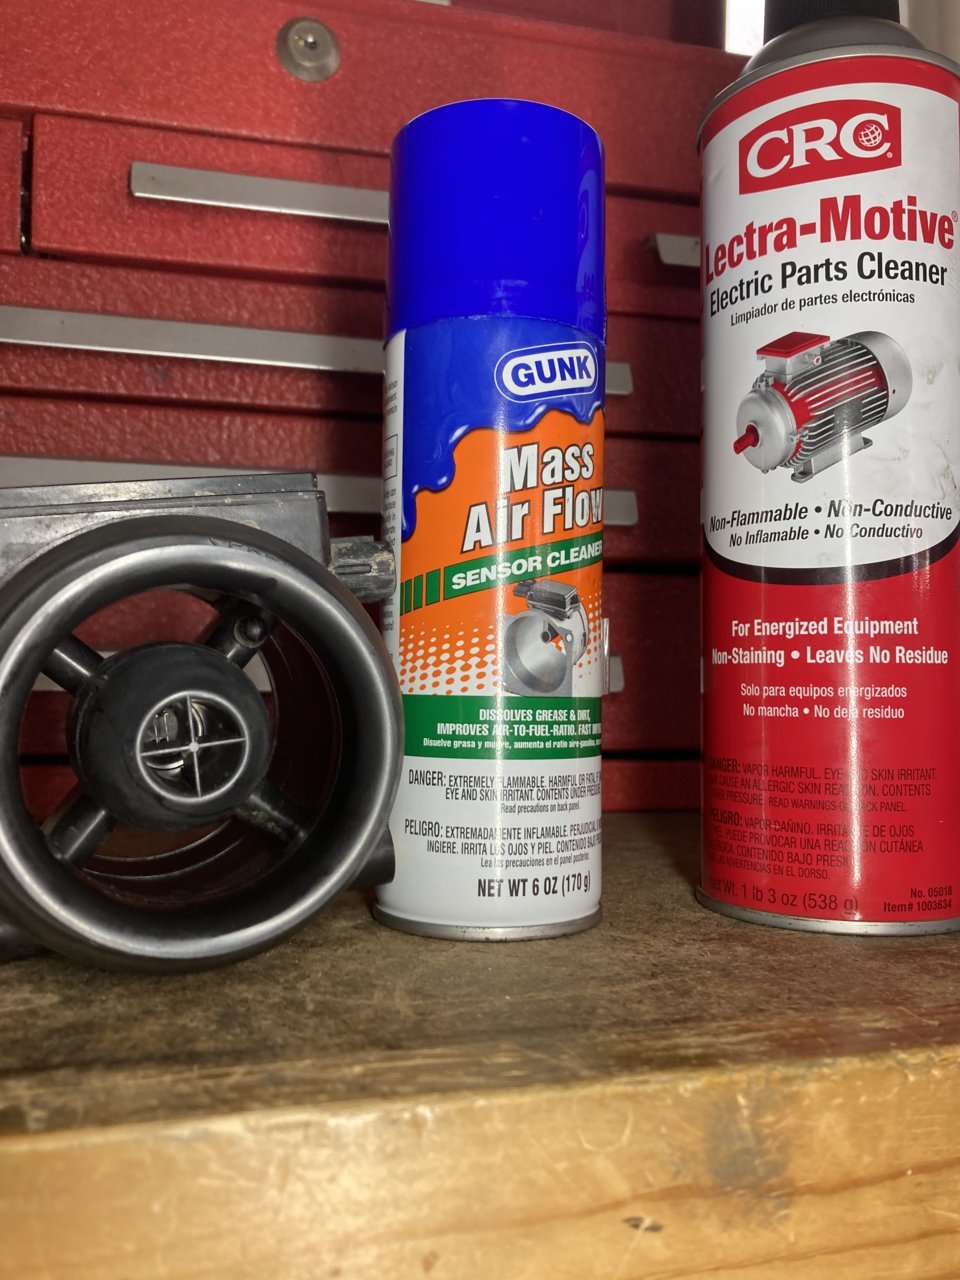 Mass air flow cleaner vs electric parts cleaner